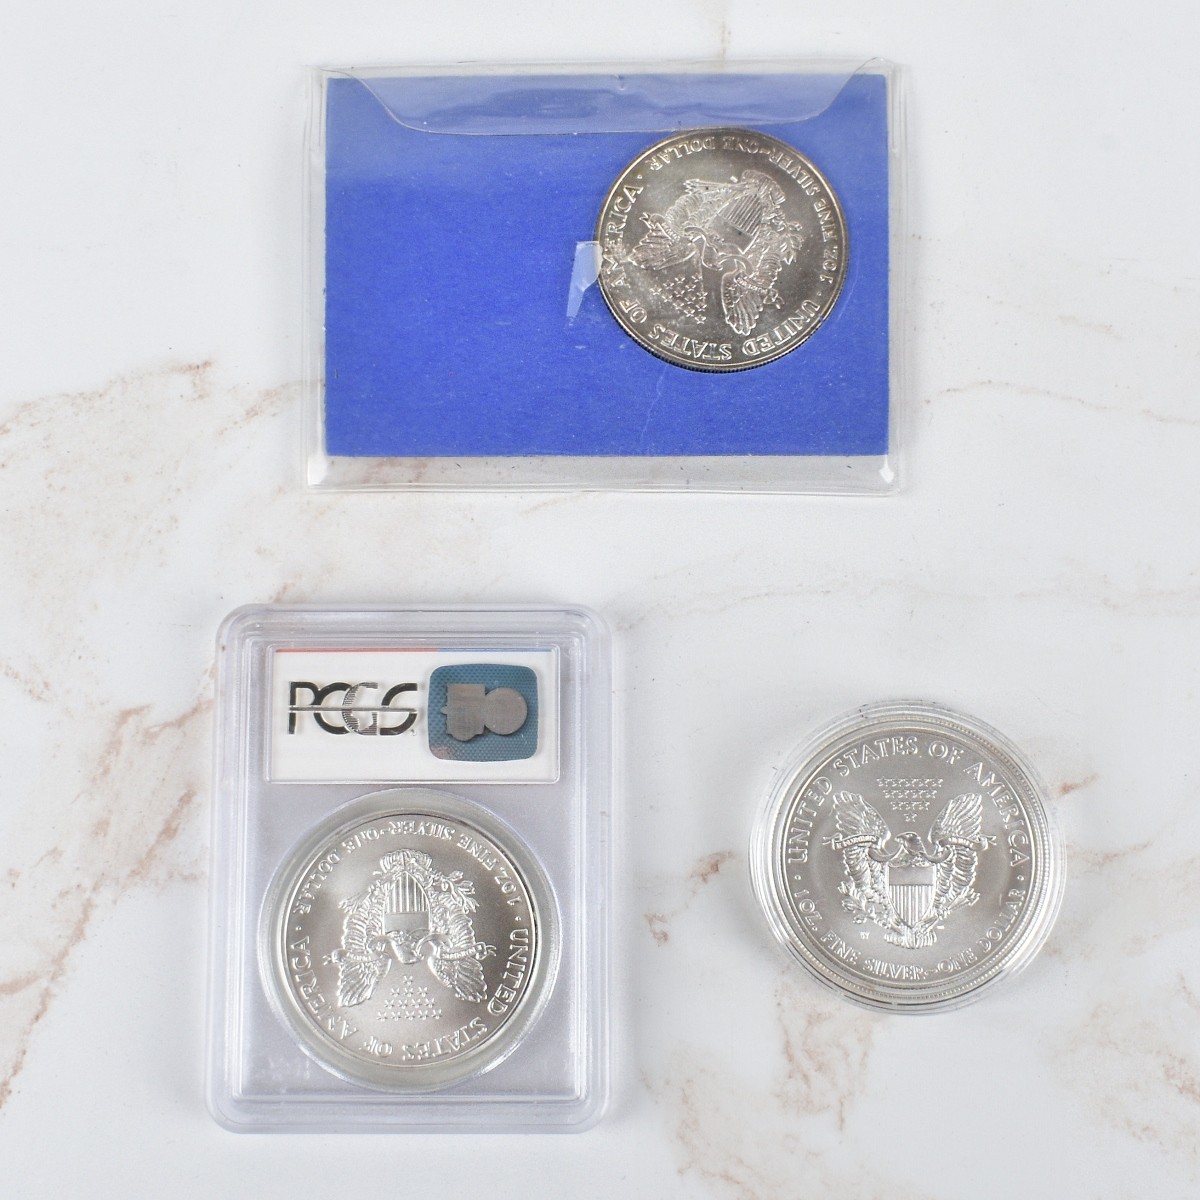 US $1 Silver Eagle Coins.